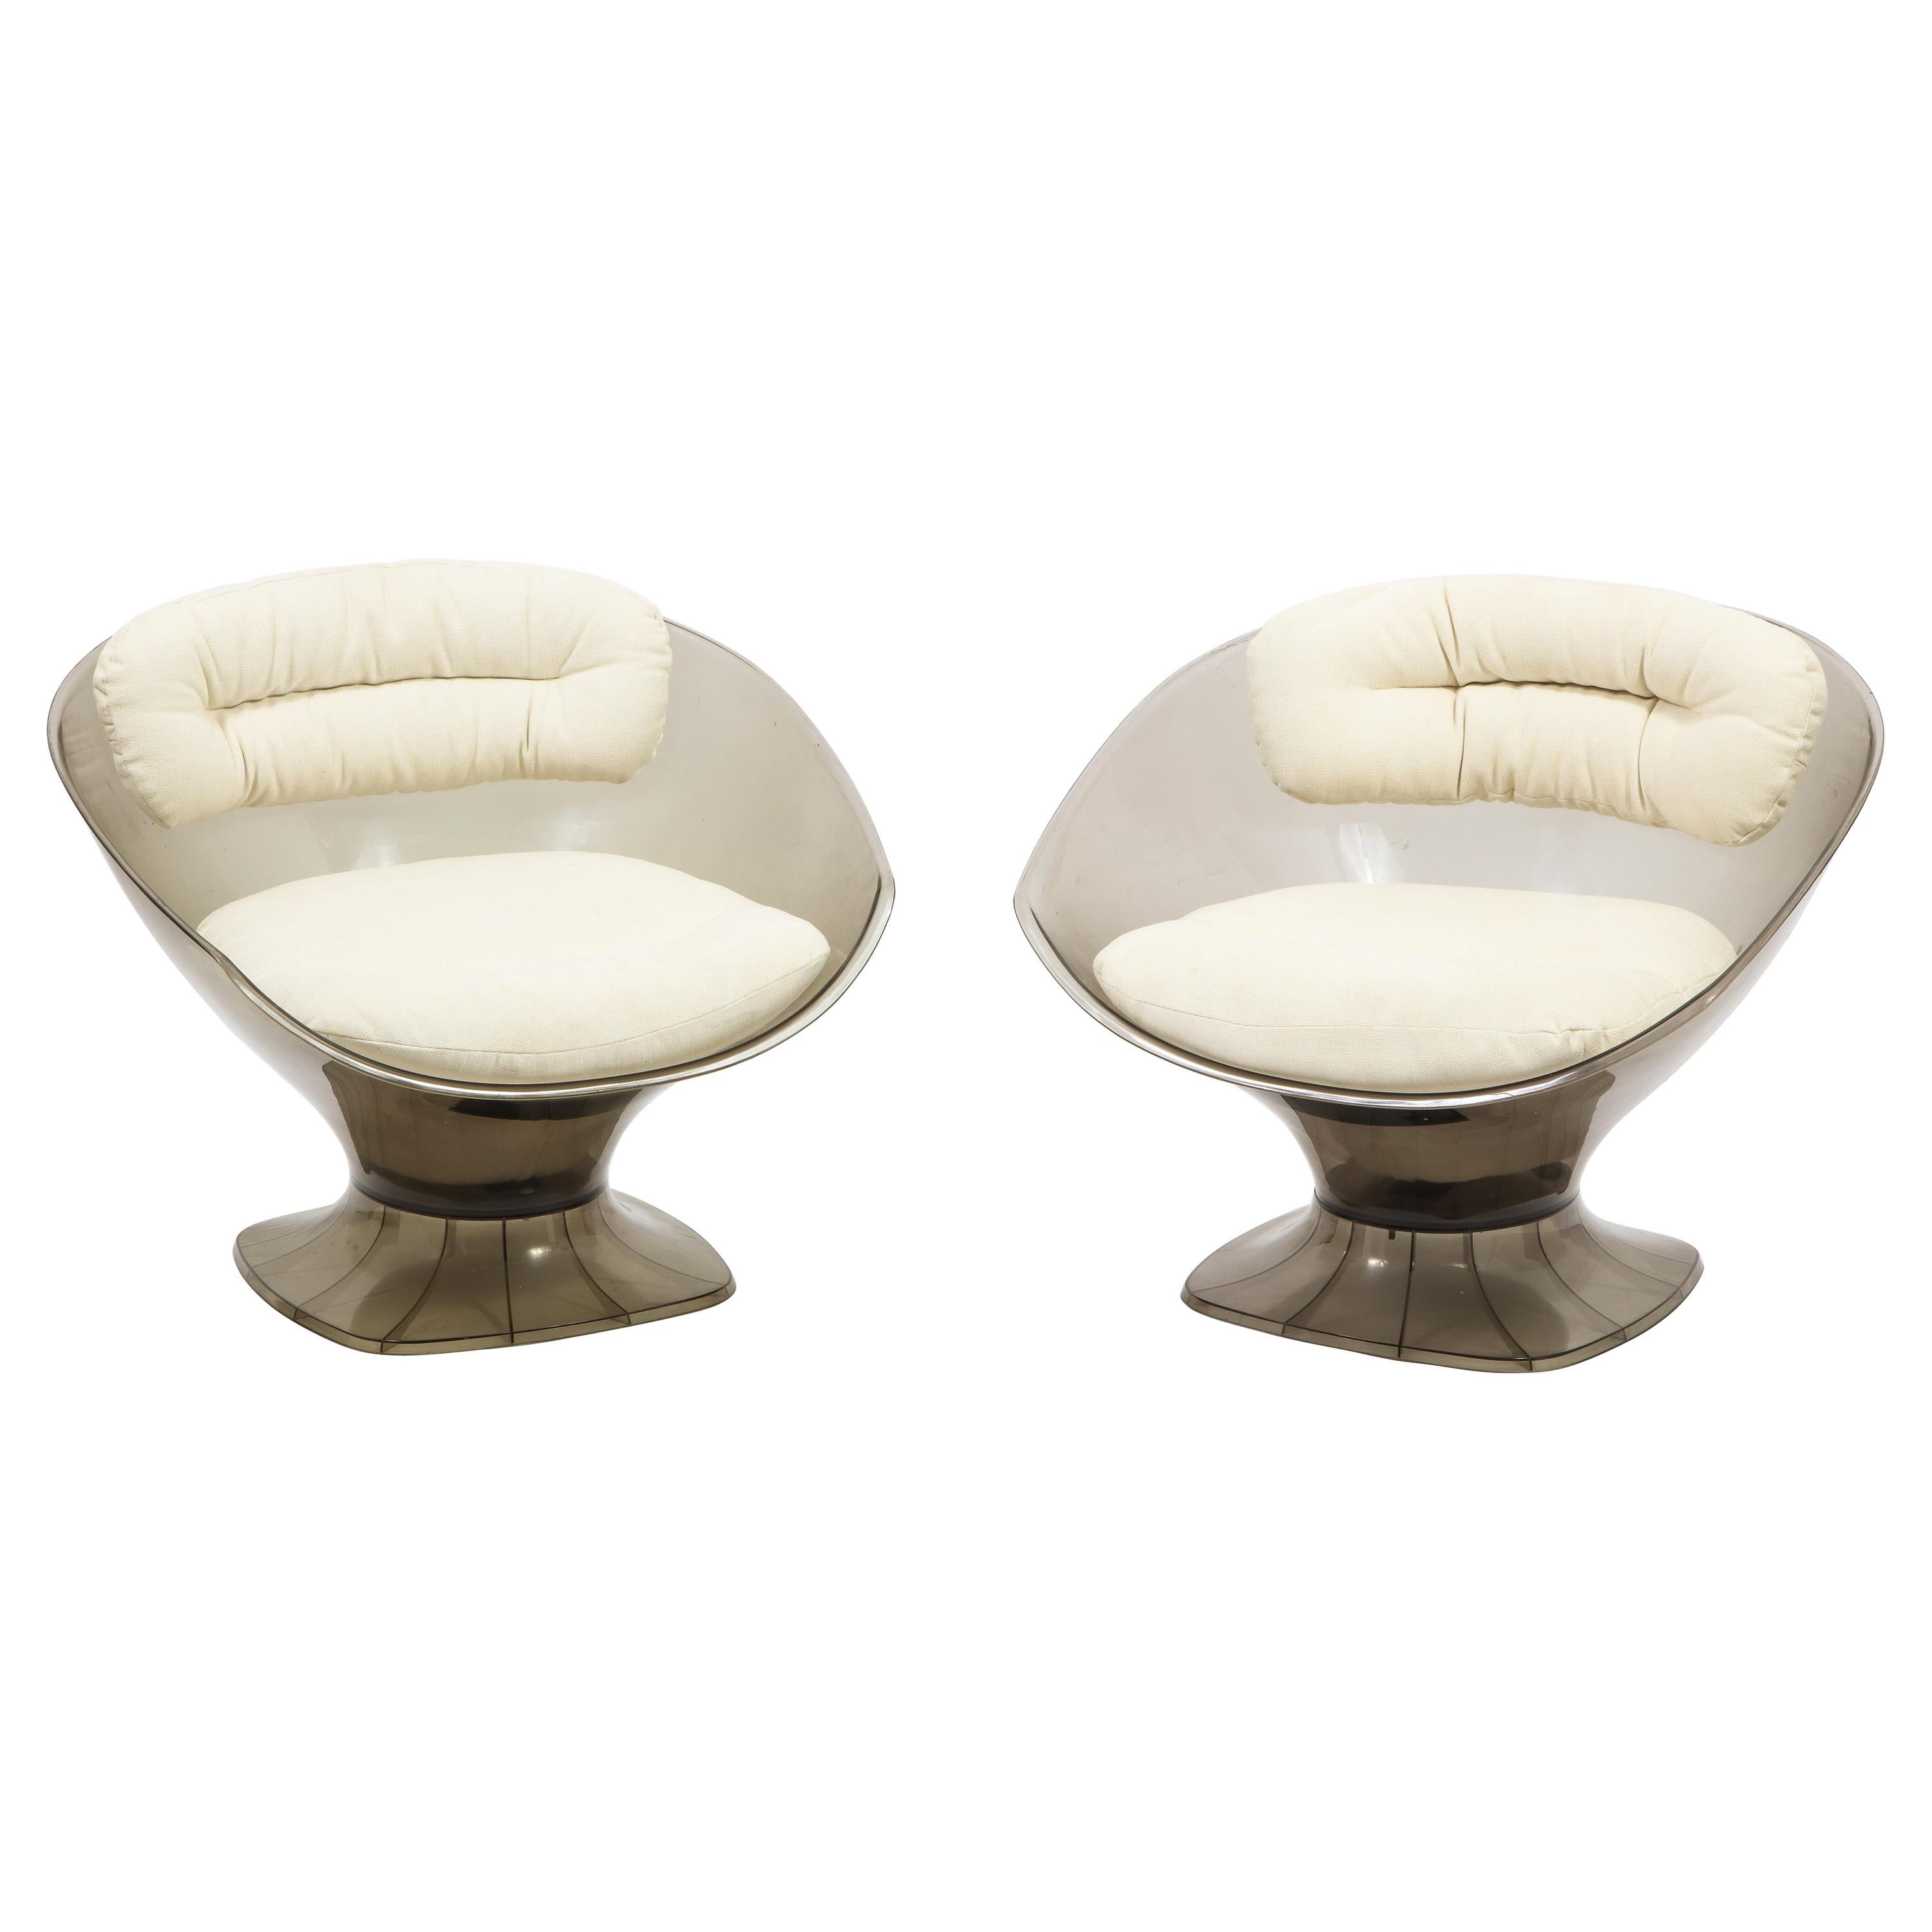 Pair of low acrylic lounges by Overman of Germany for Raphael, seen on the decorator's book last page.